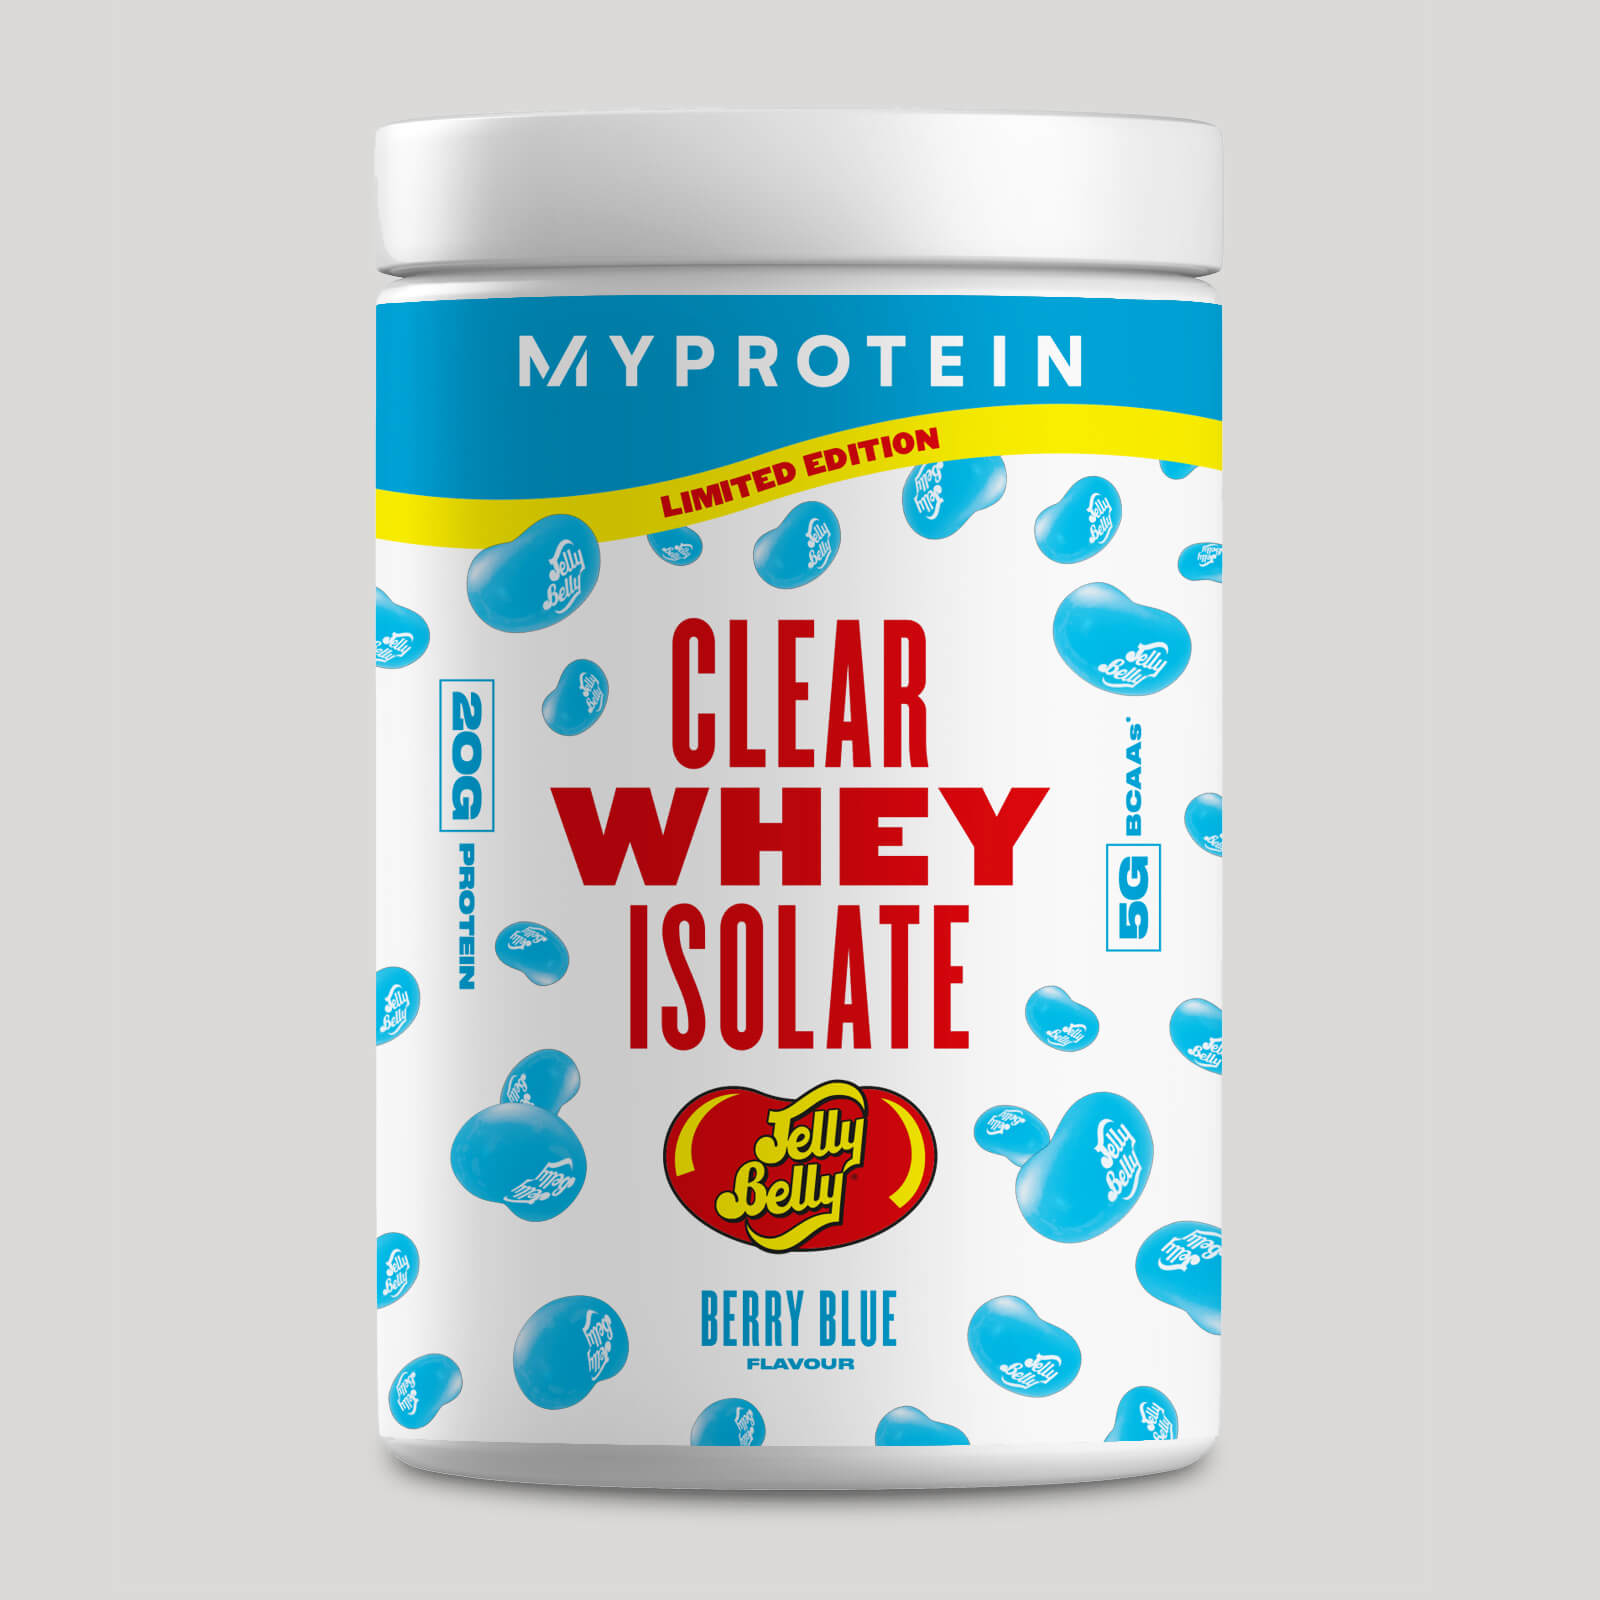 Clear Whey Isolate – Power Rangers